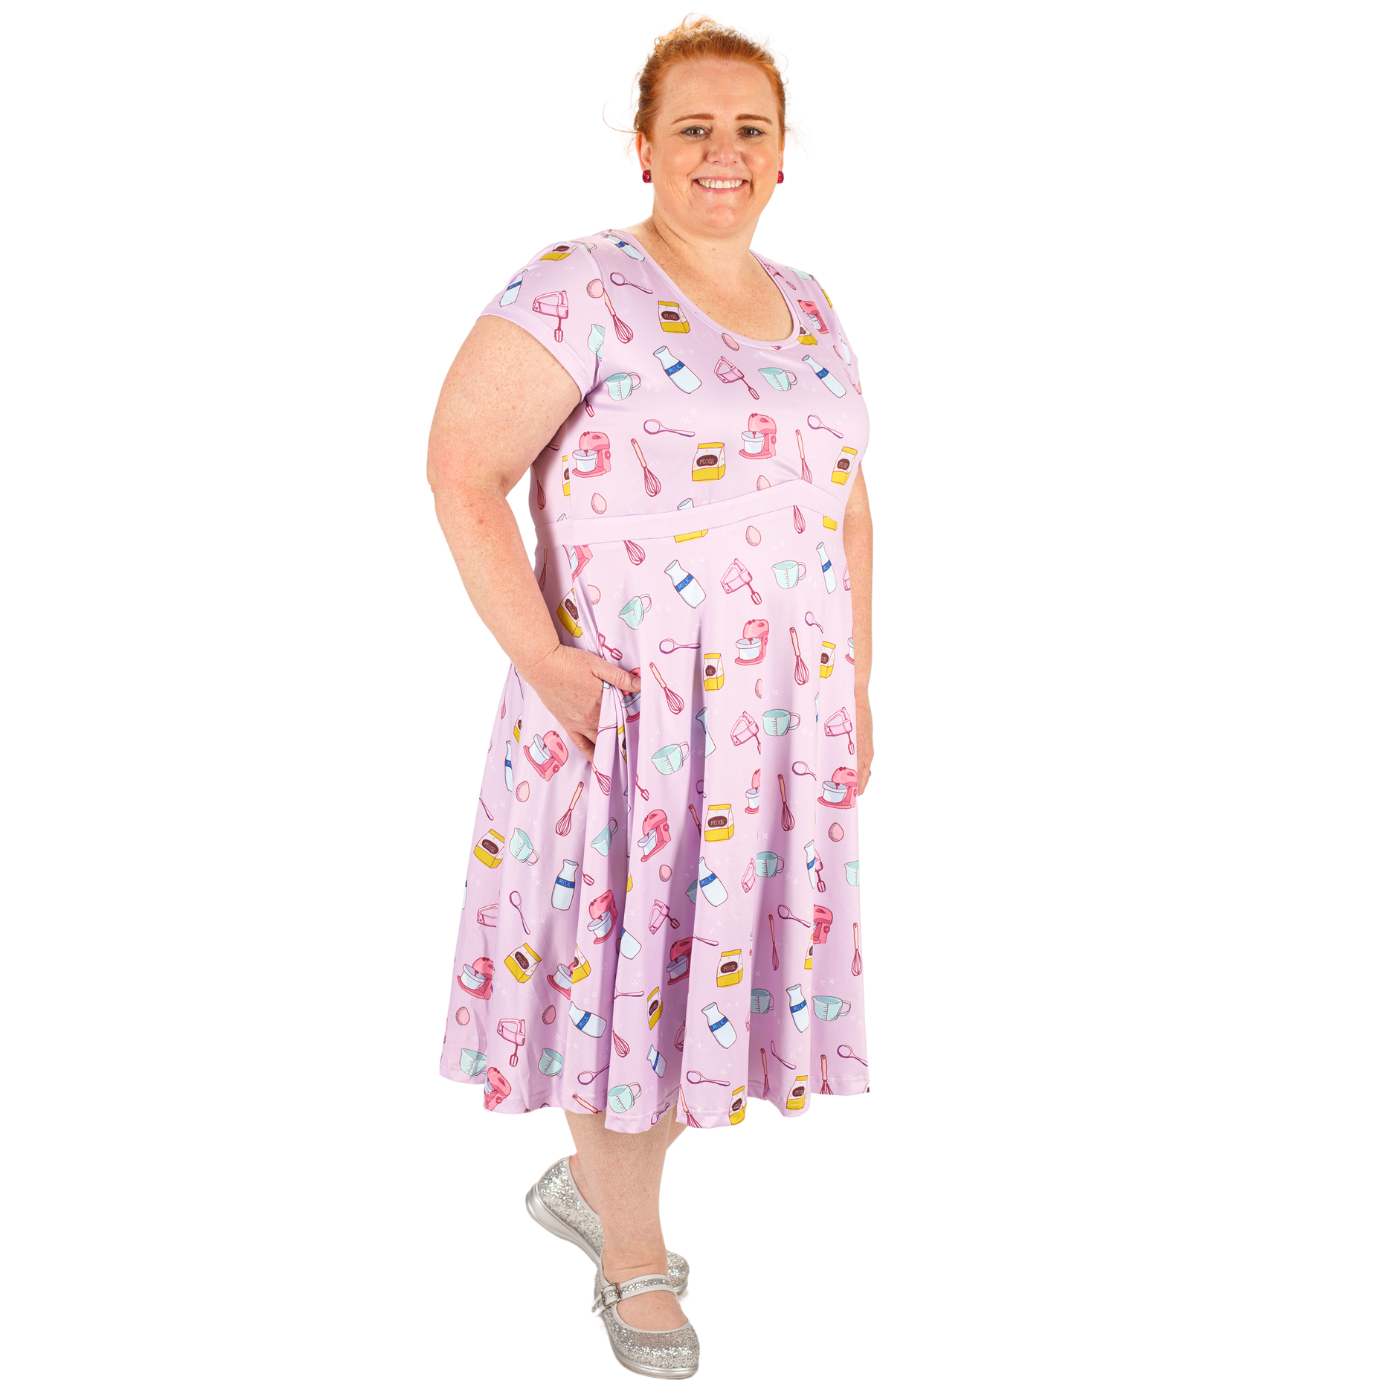 Bakery Tea Dress by RainbowsAndFairies.com (Cooking - Whisk- Mixer - Dress With Pockets - Rockabilly - Vintage Inspired) - SKU: CL_TEADR_BAKER_ORG - Pic 05